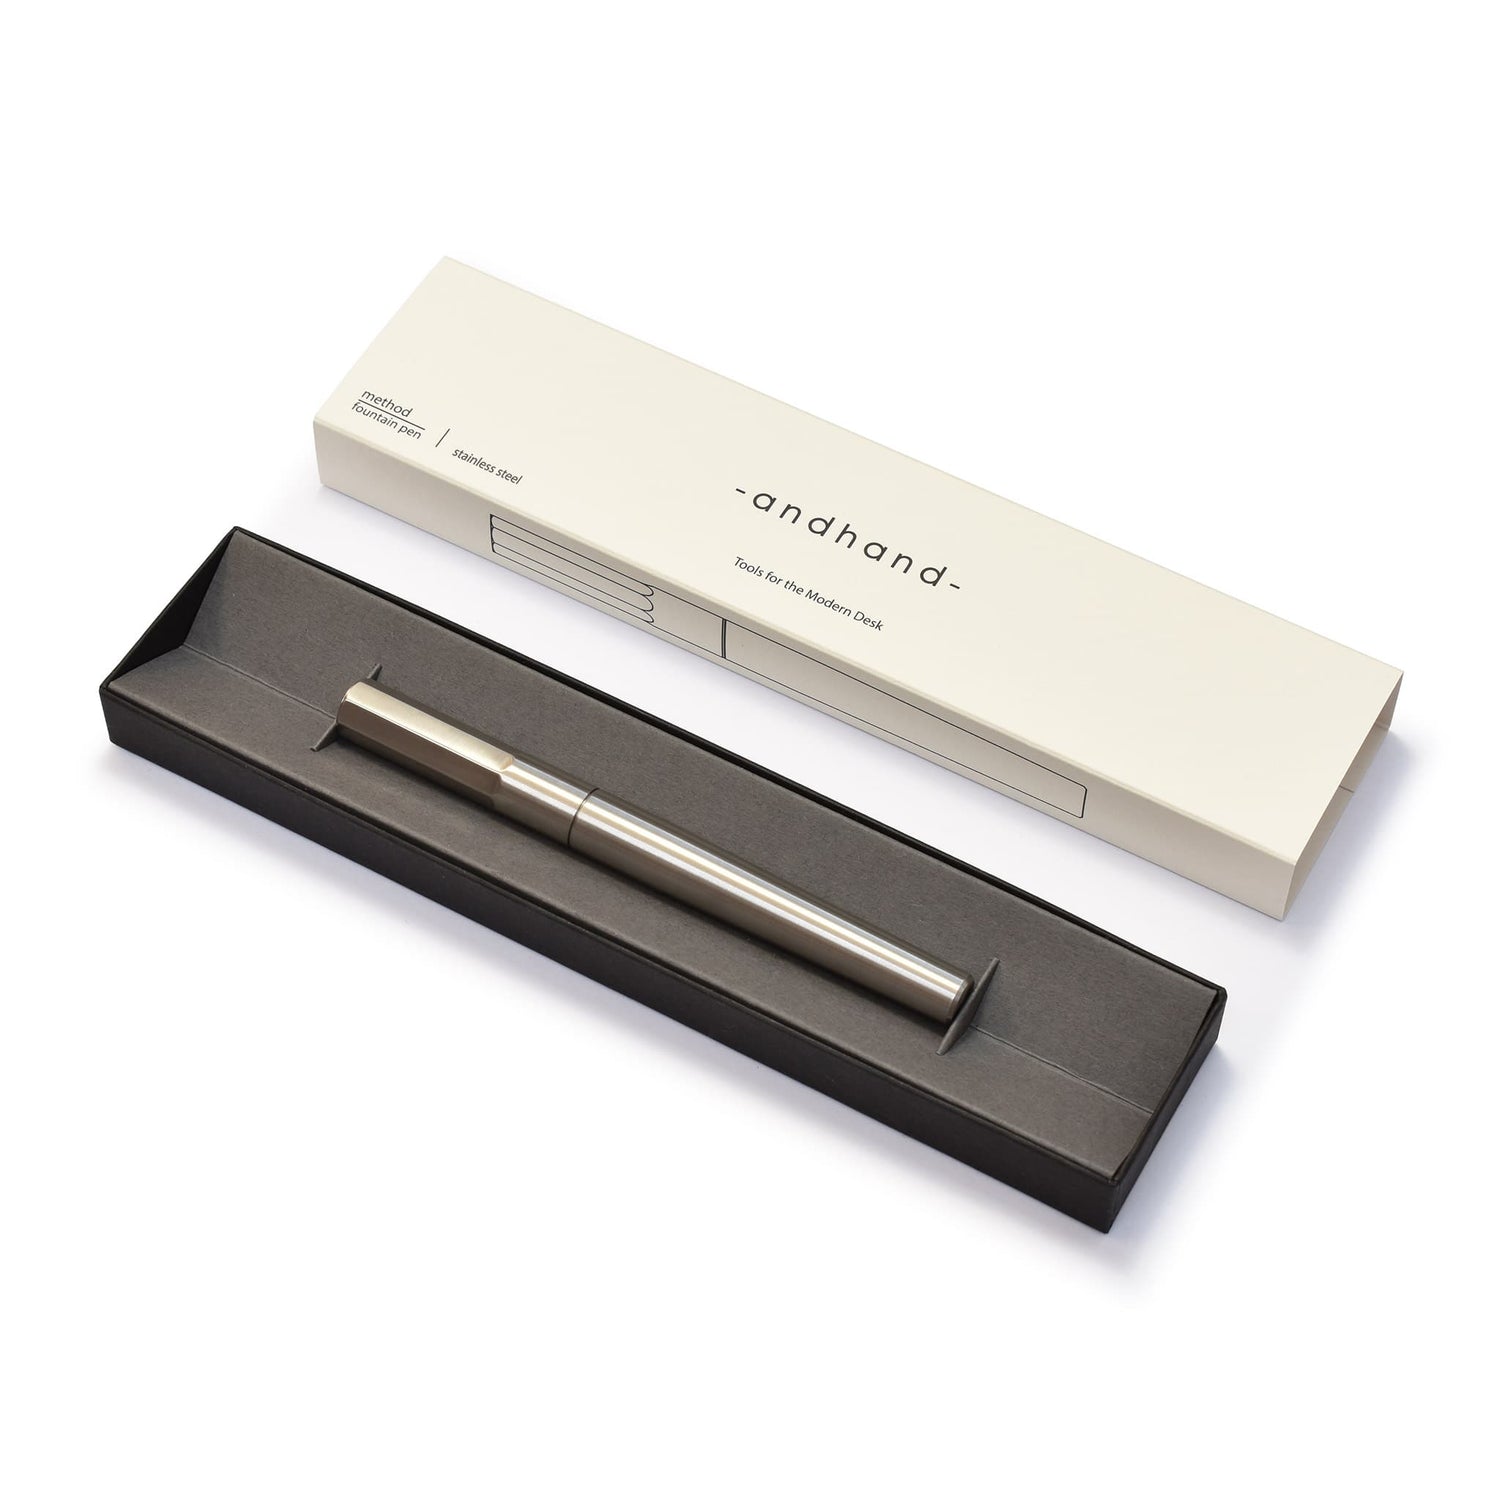 Stainless steel fountain pen. It comes in a premium card presentation box with minimal graphic sleeve.